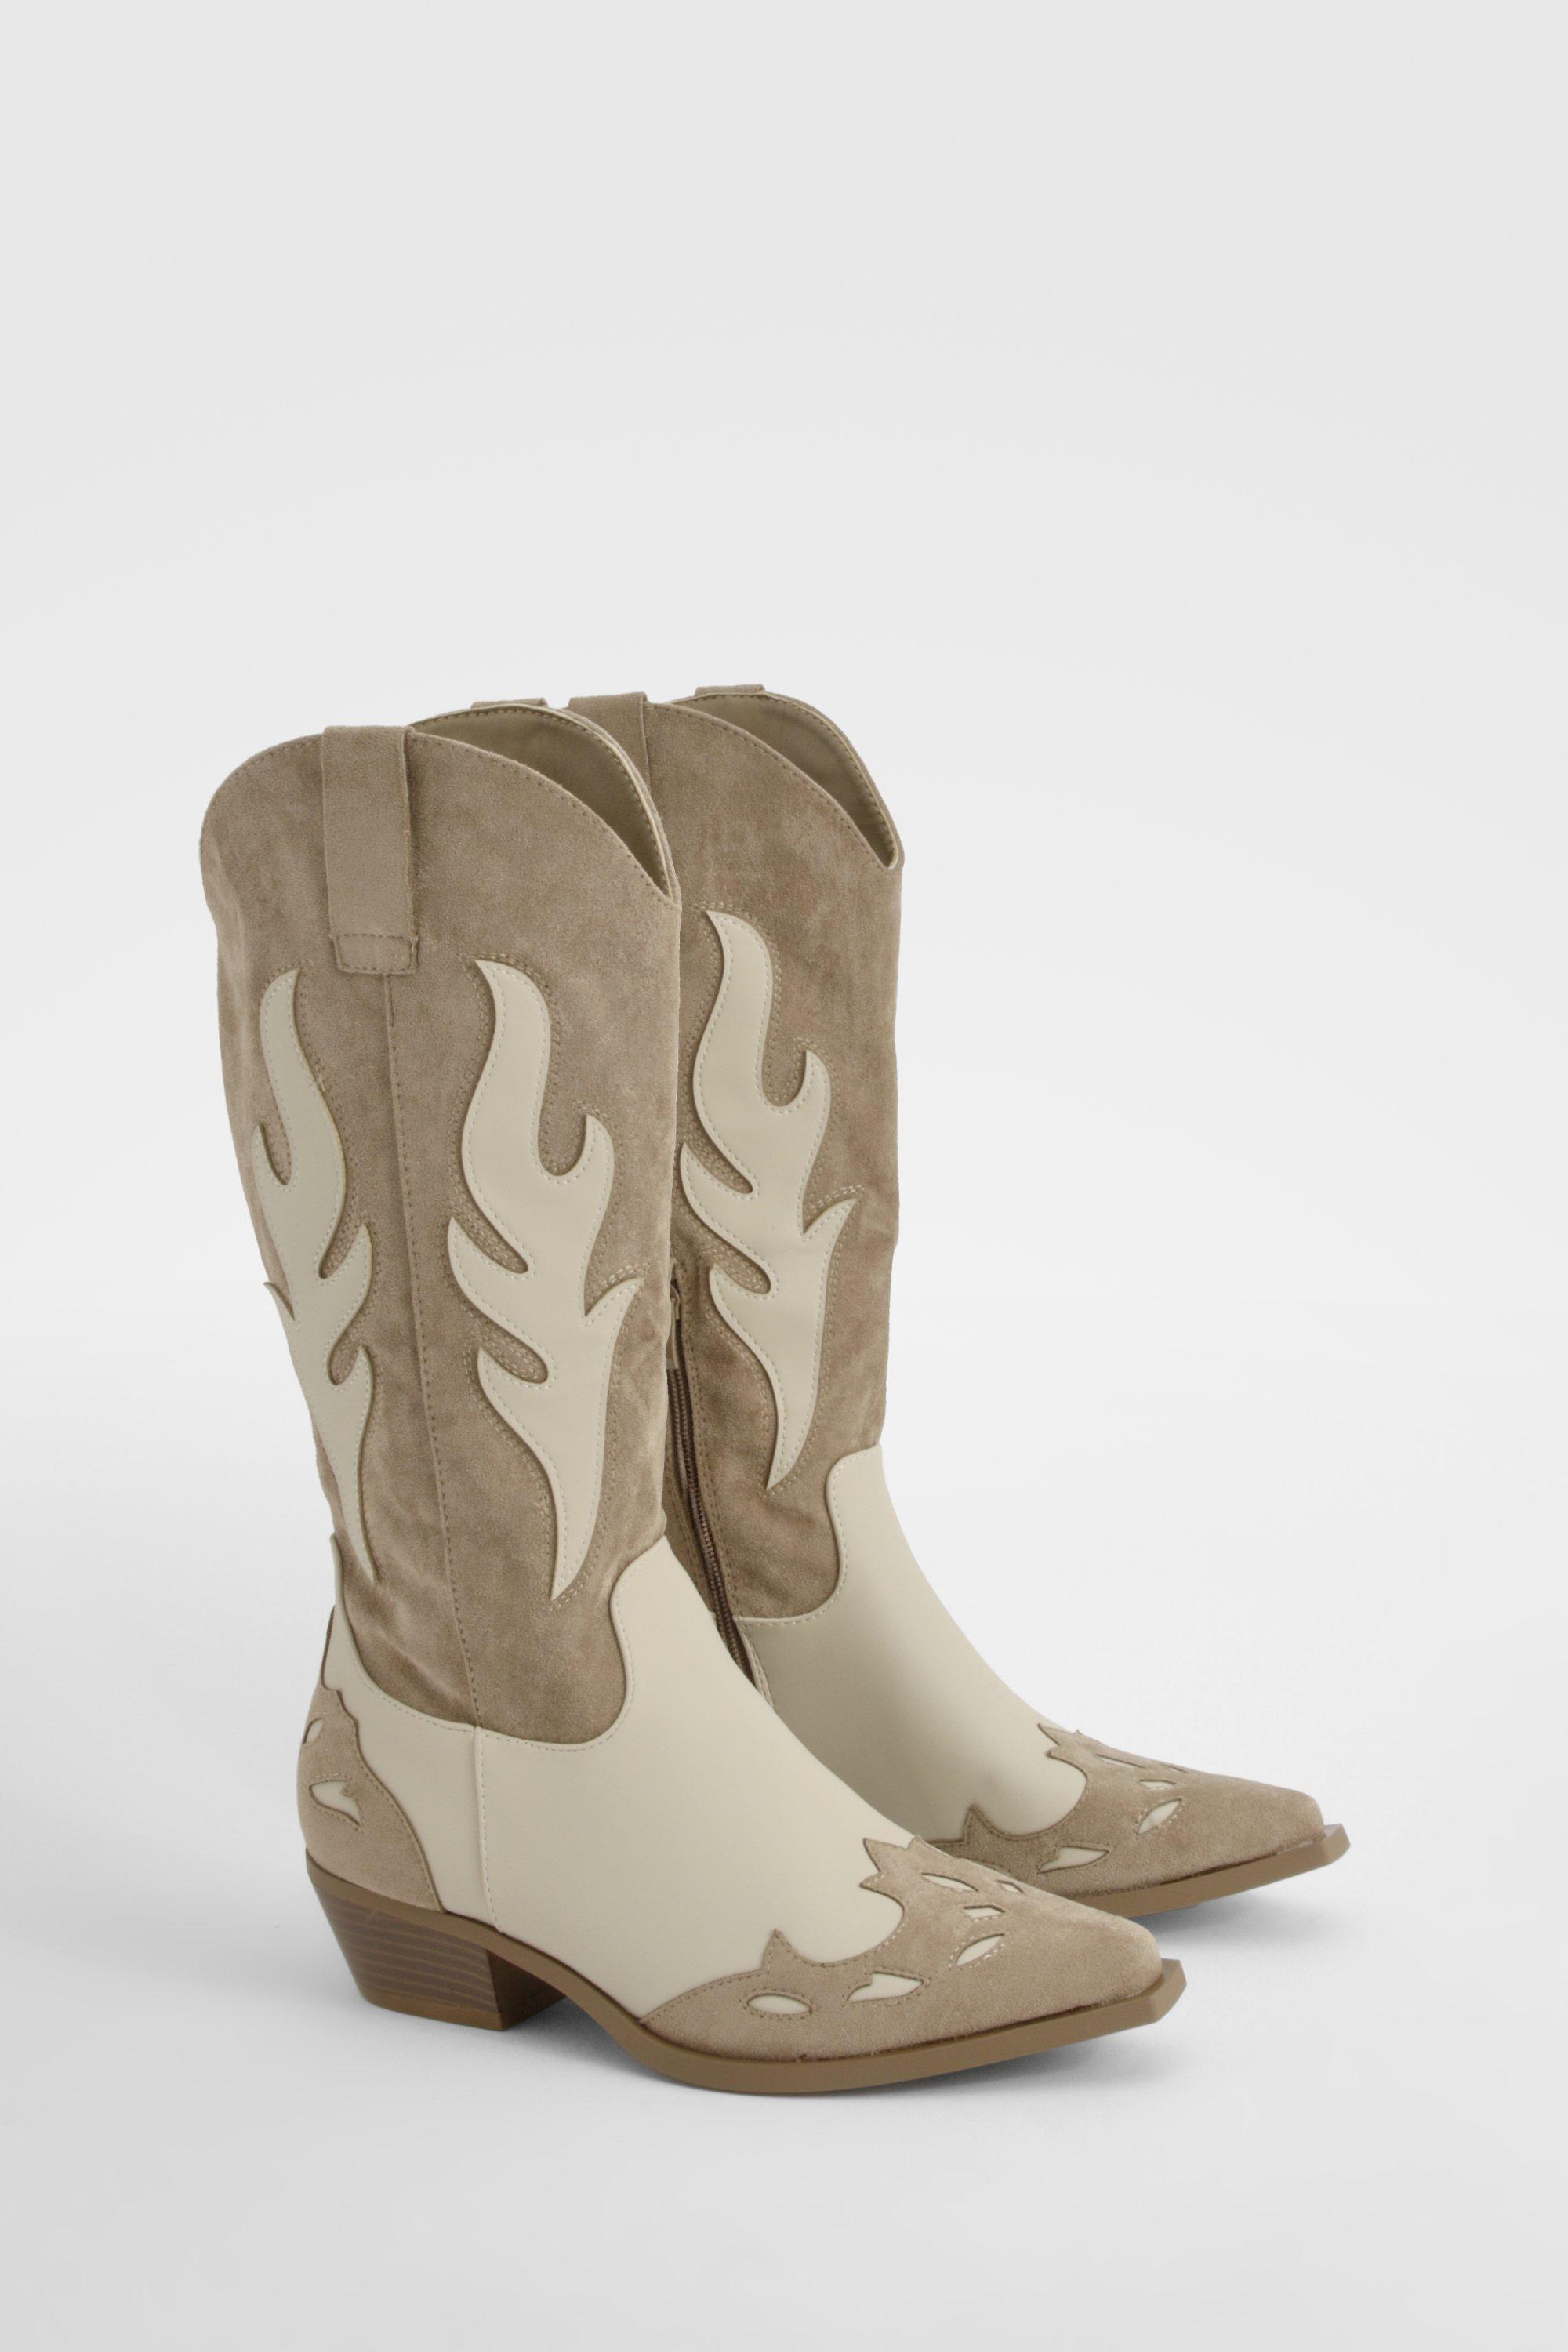 Boohoo Contrast Panel Western Cowboy Boots, Taupe